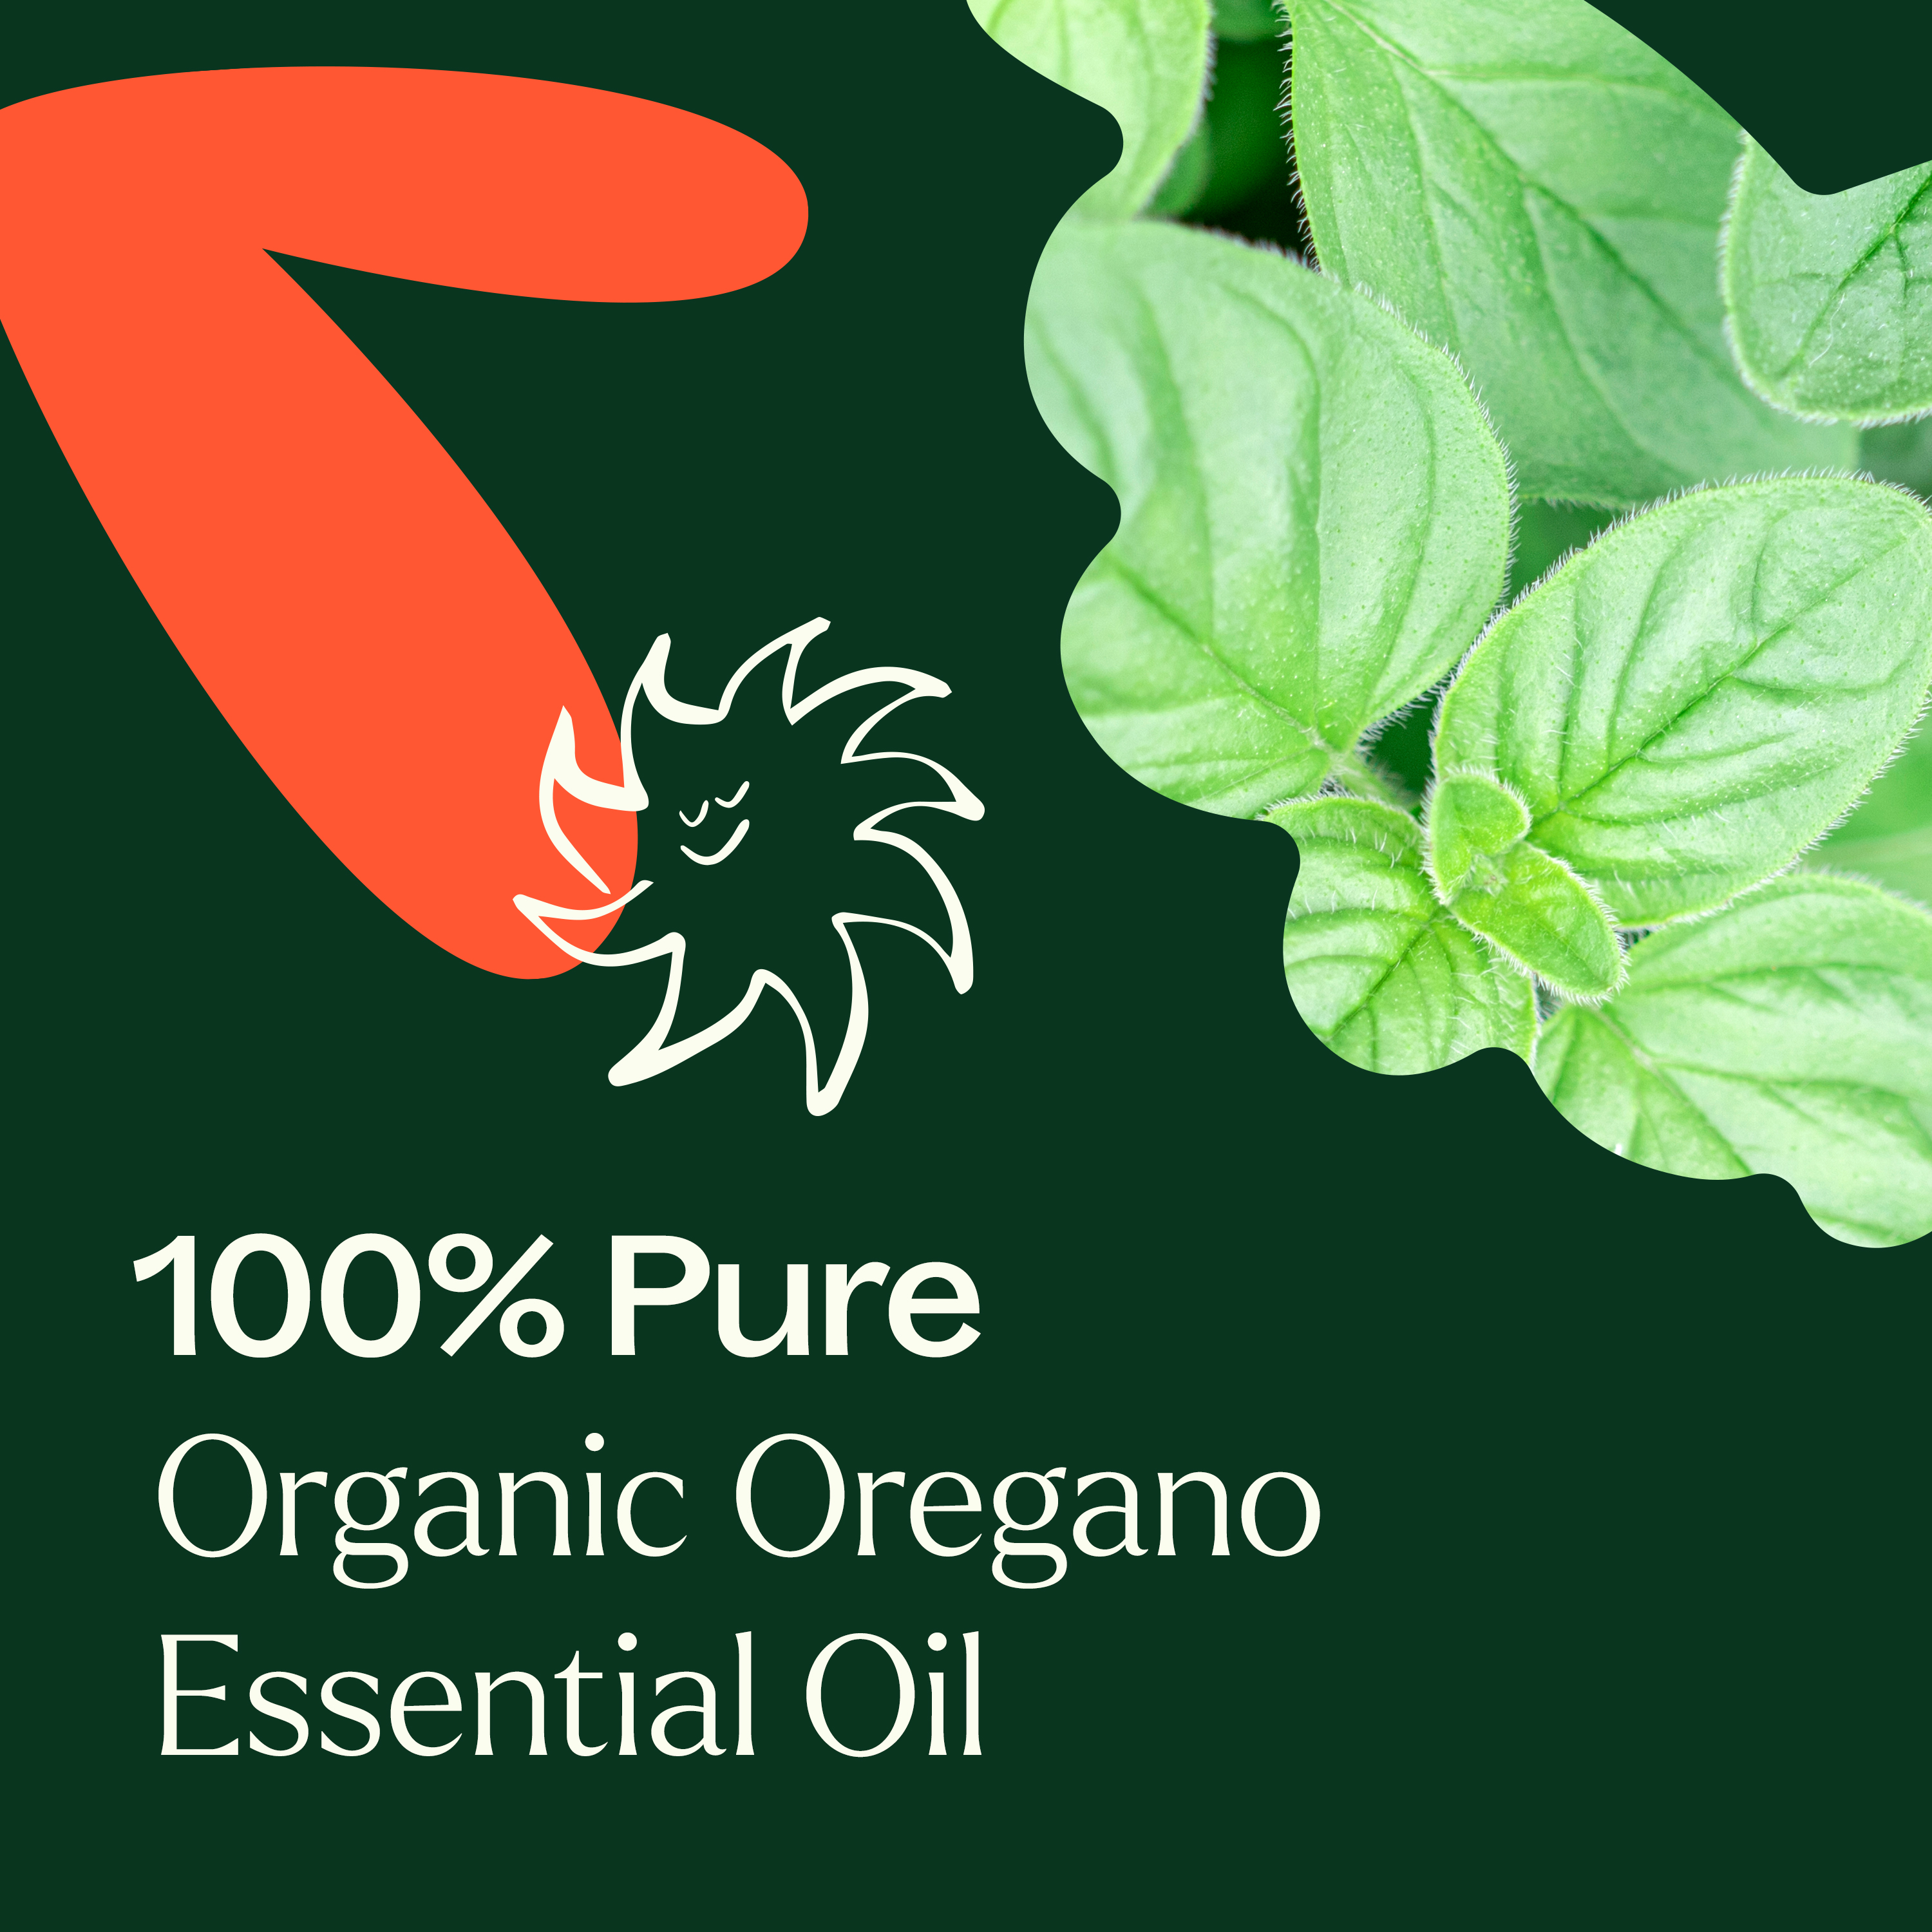 Plant Therapy Organic Oregano Essential Oil 100% Pure, USDA Certified Organic, Undiluted, Natural Aromatherapy, Therapeutic Grade 10 mL (1/3 oz) - image 3 of 7